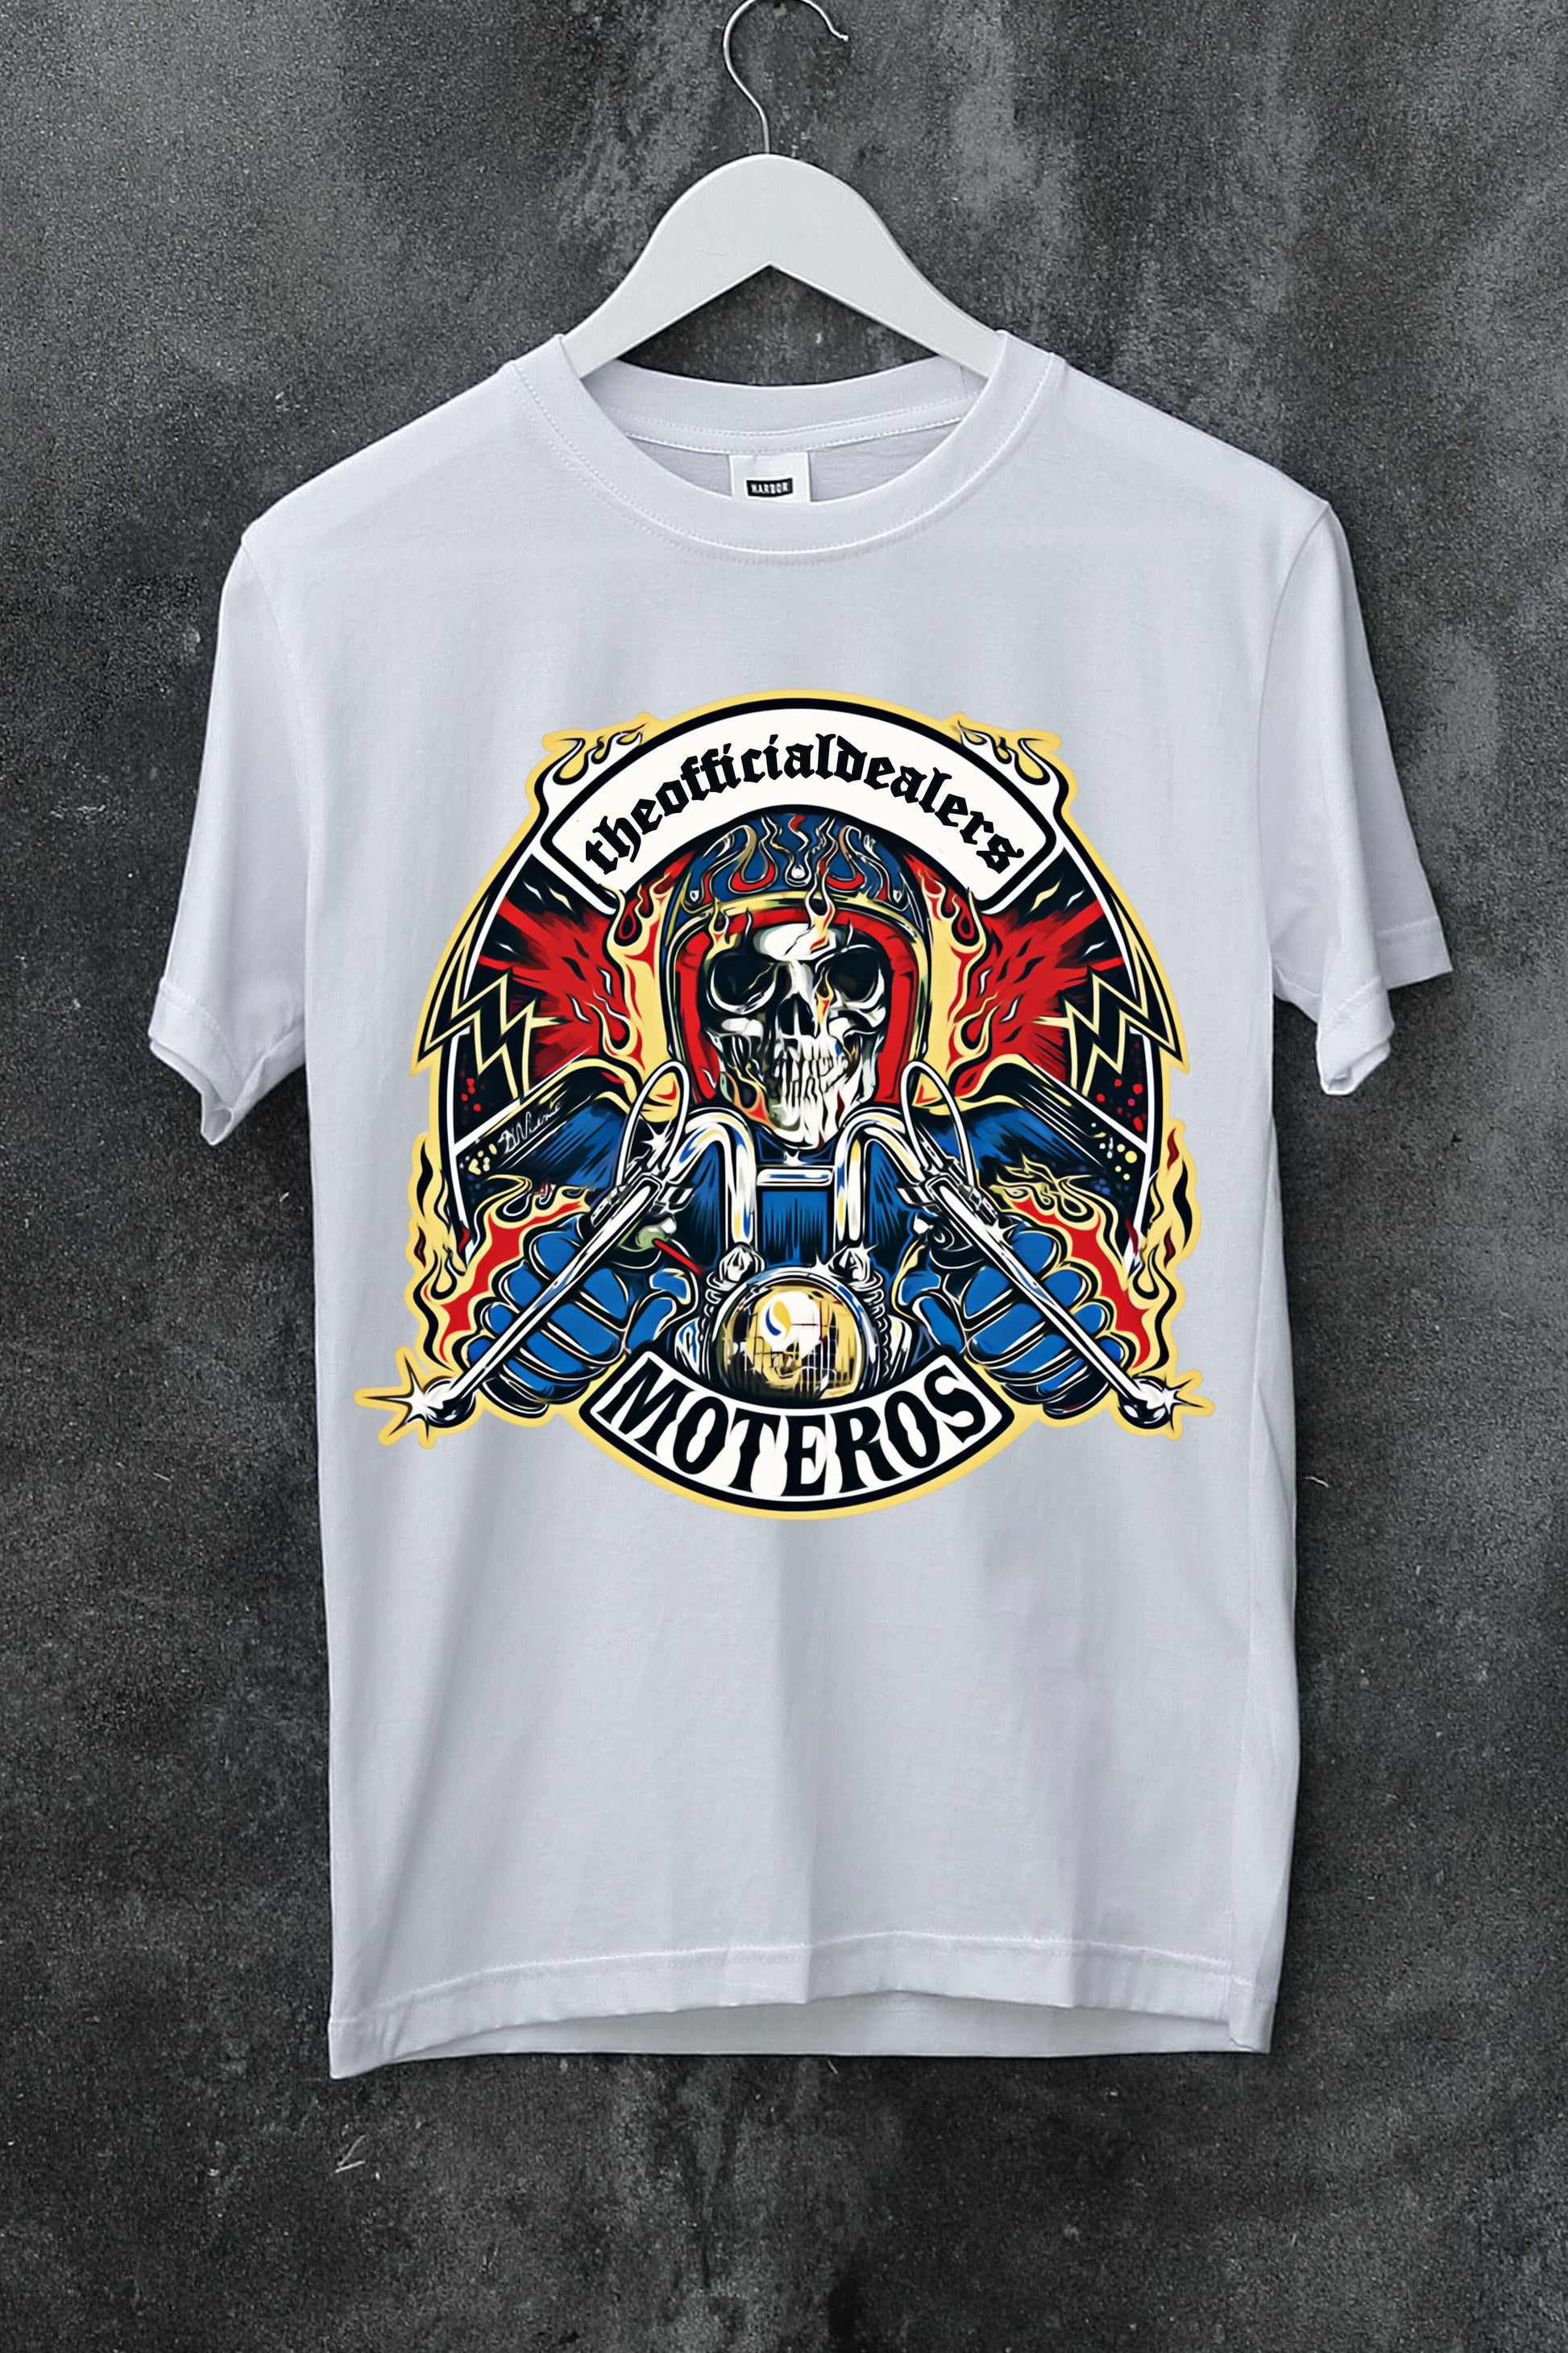 MOTORCYCLE SKELETON T-SHIRT - The Official Dealers